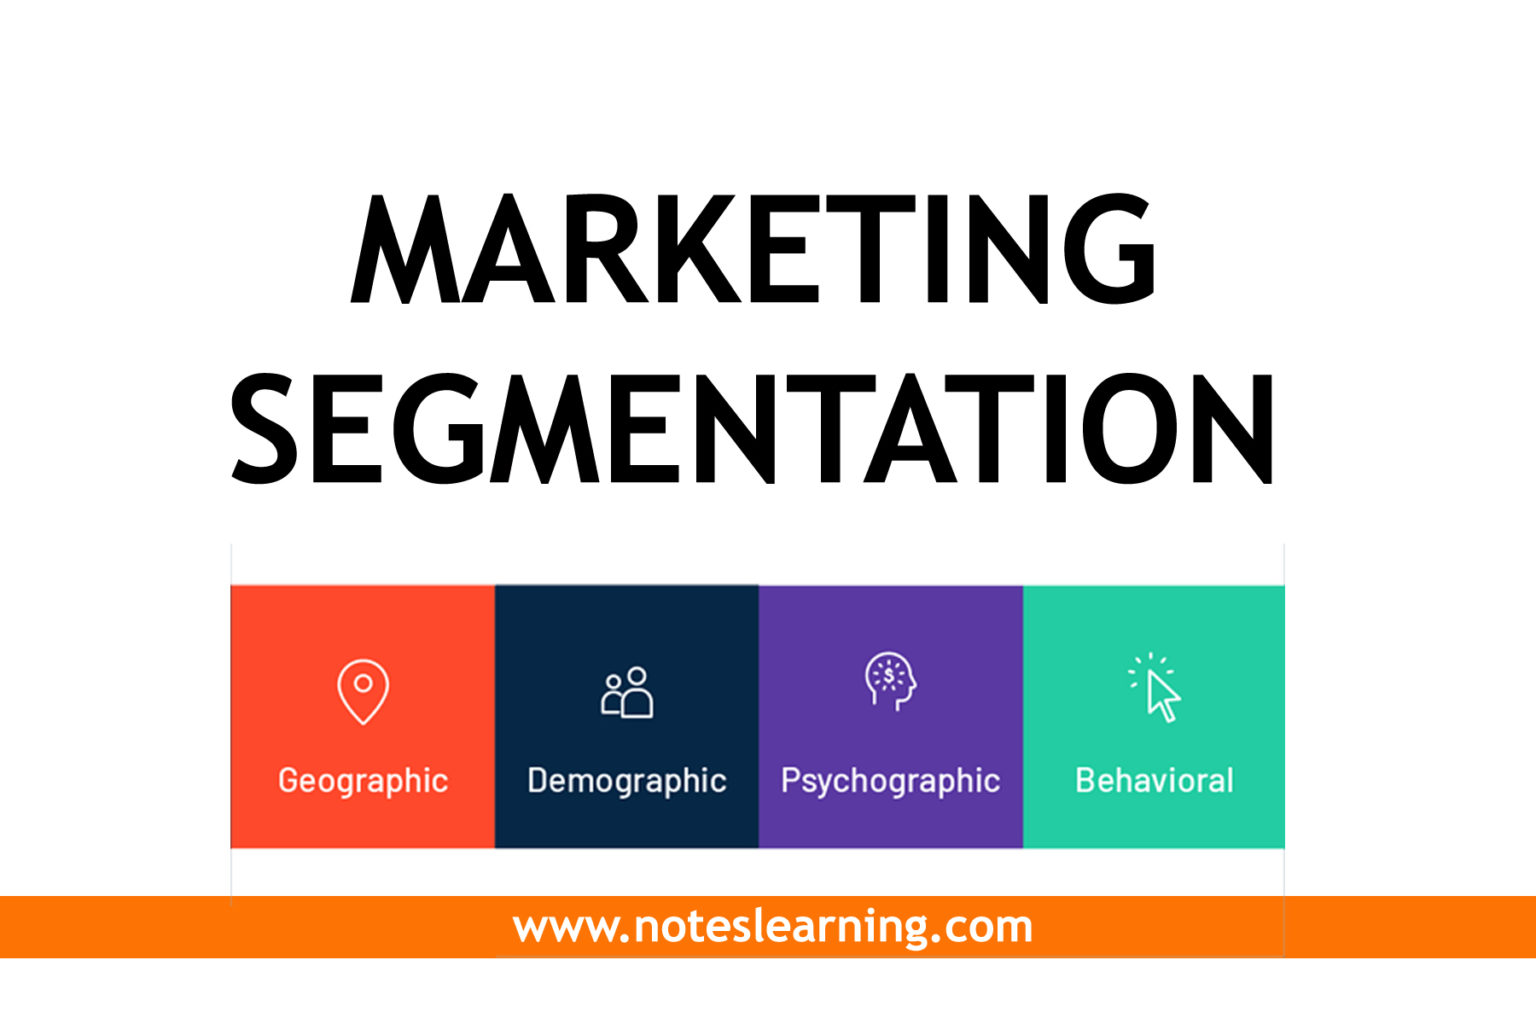 market-segmentation-introduction-and-benefit-notes-learning